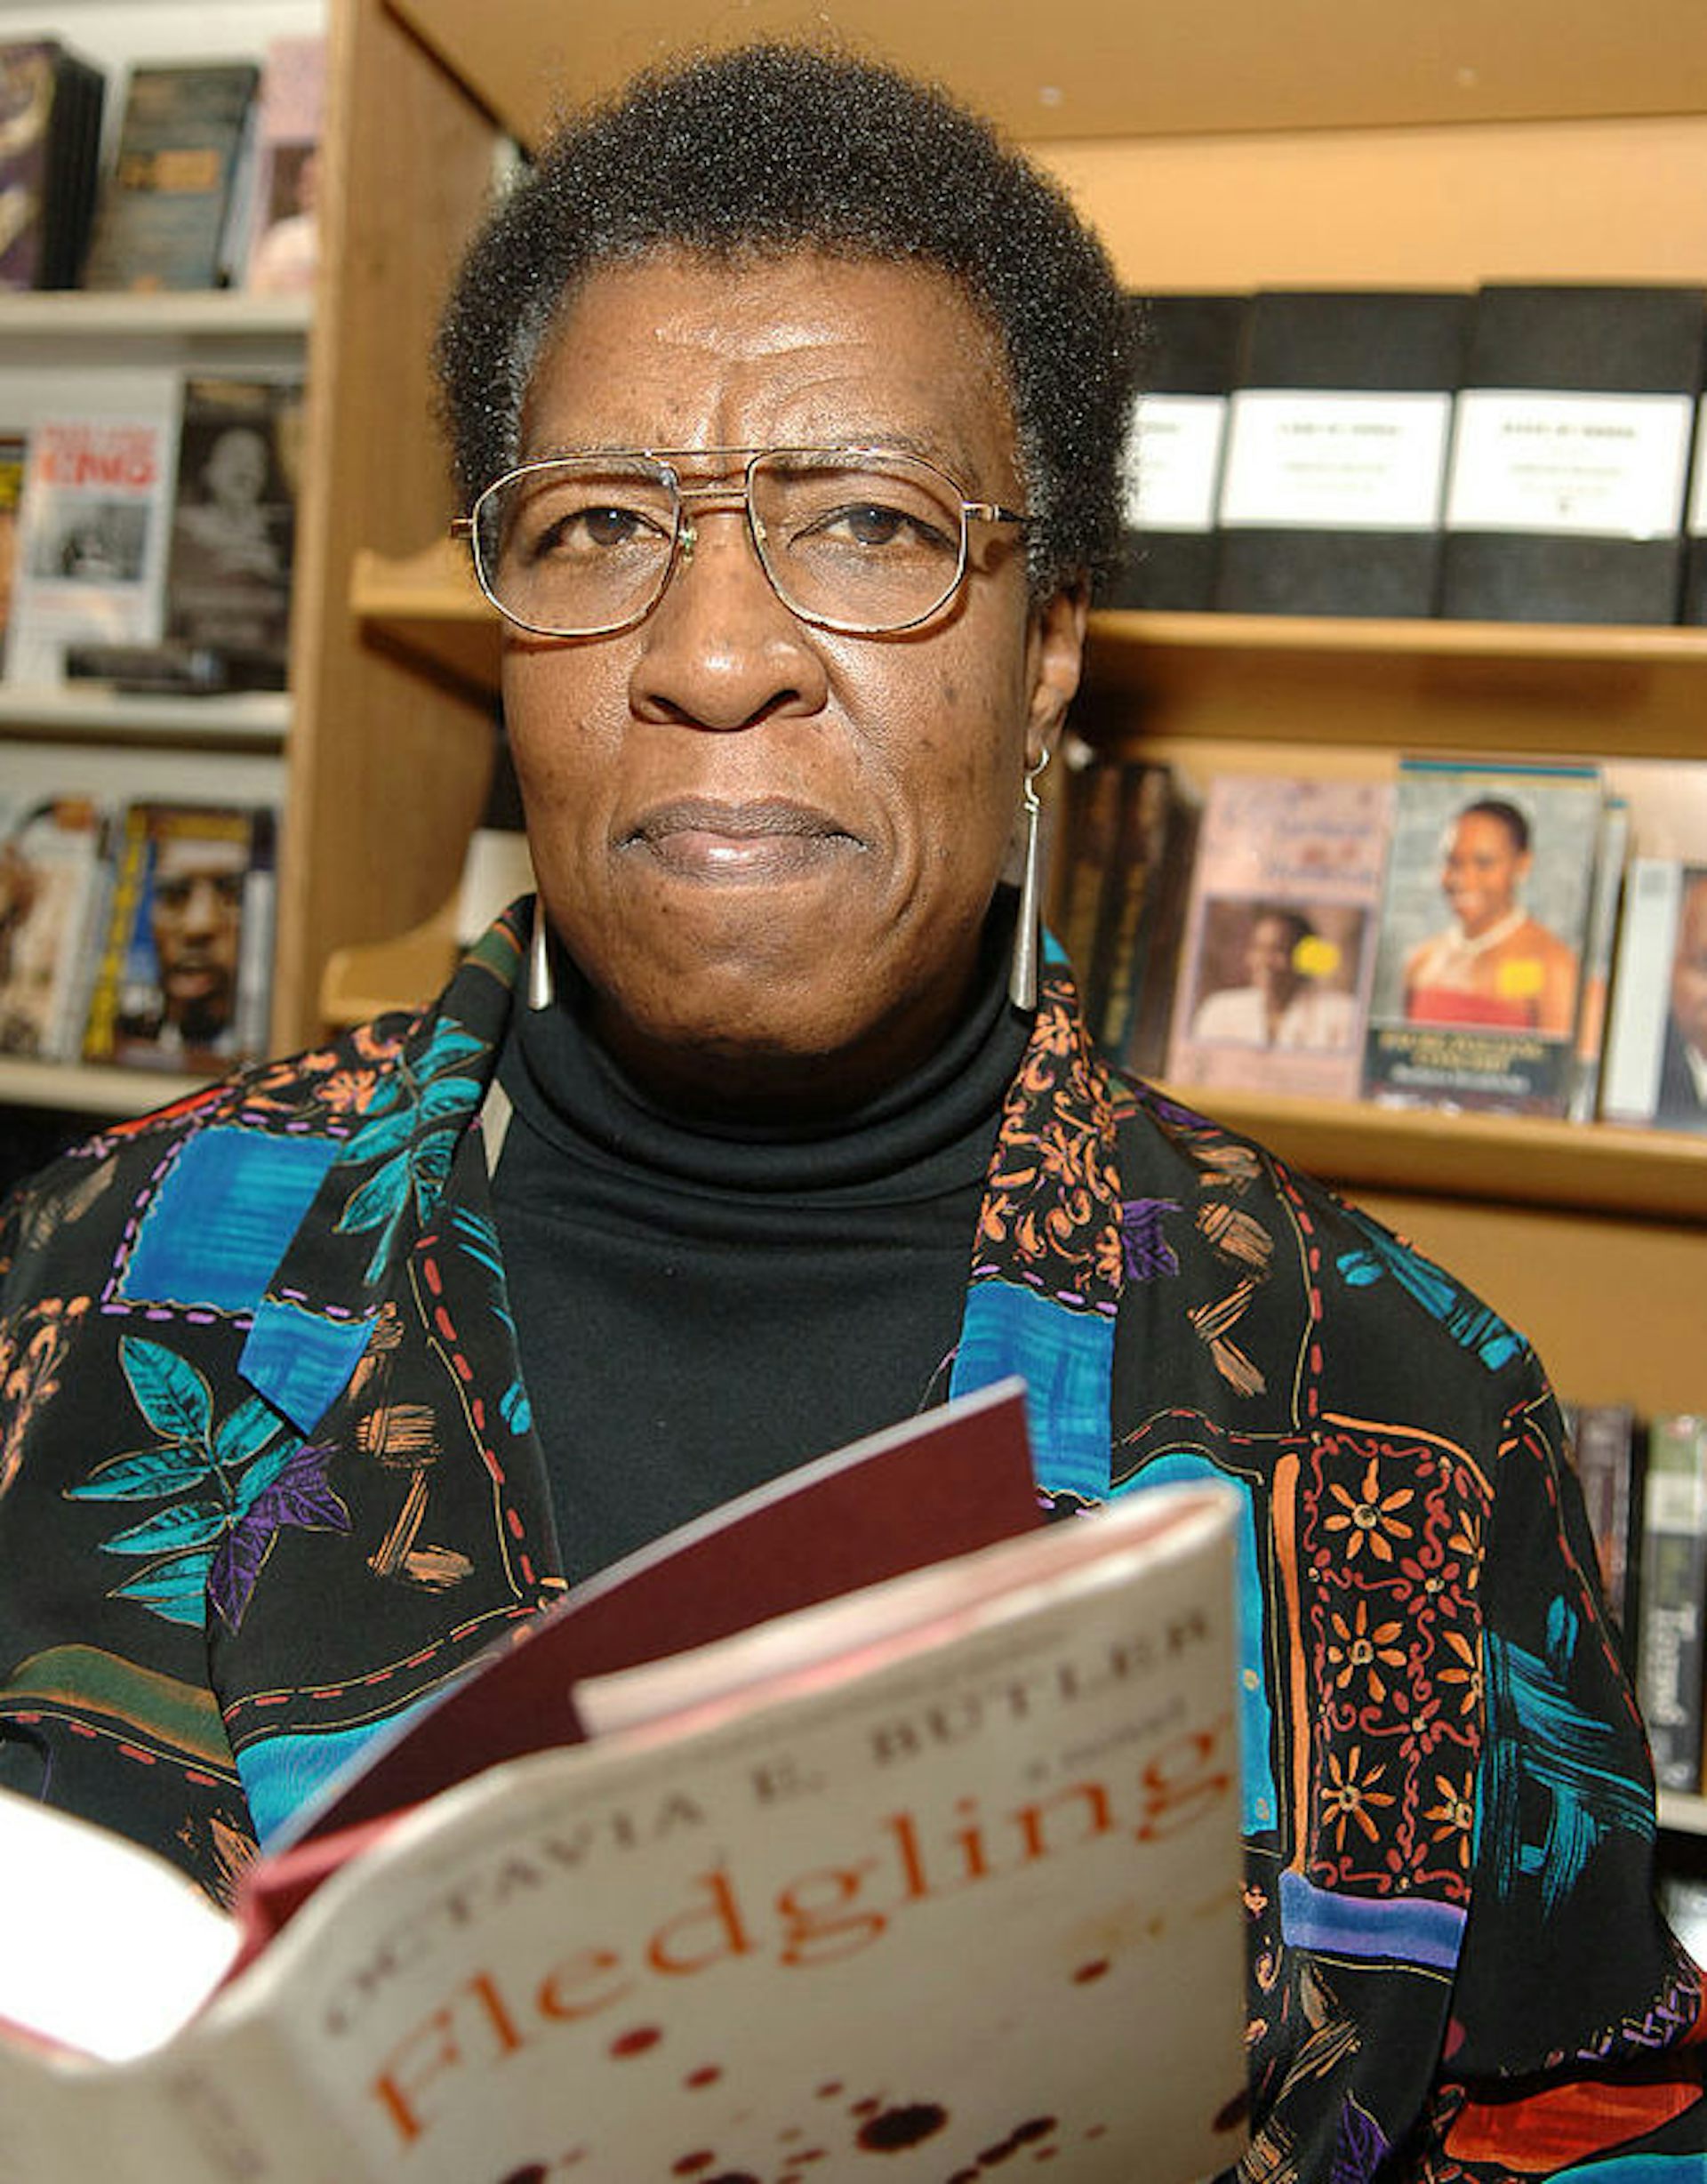 Woman in glasses holds a book.